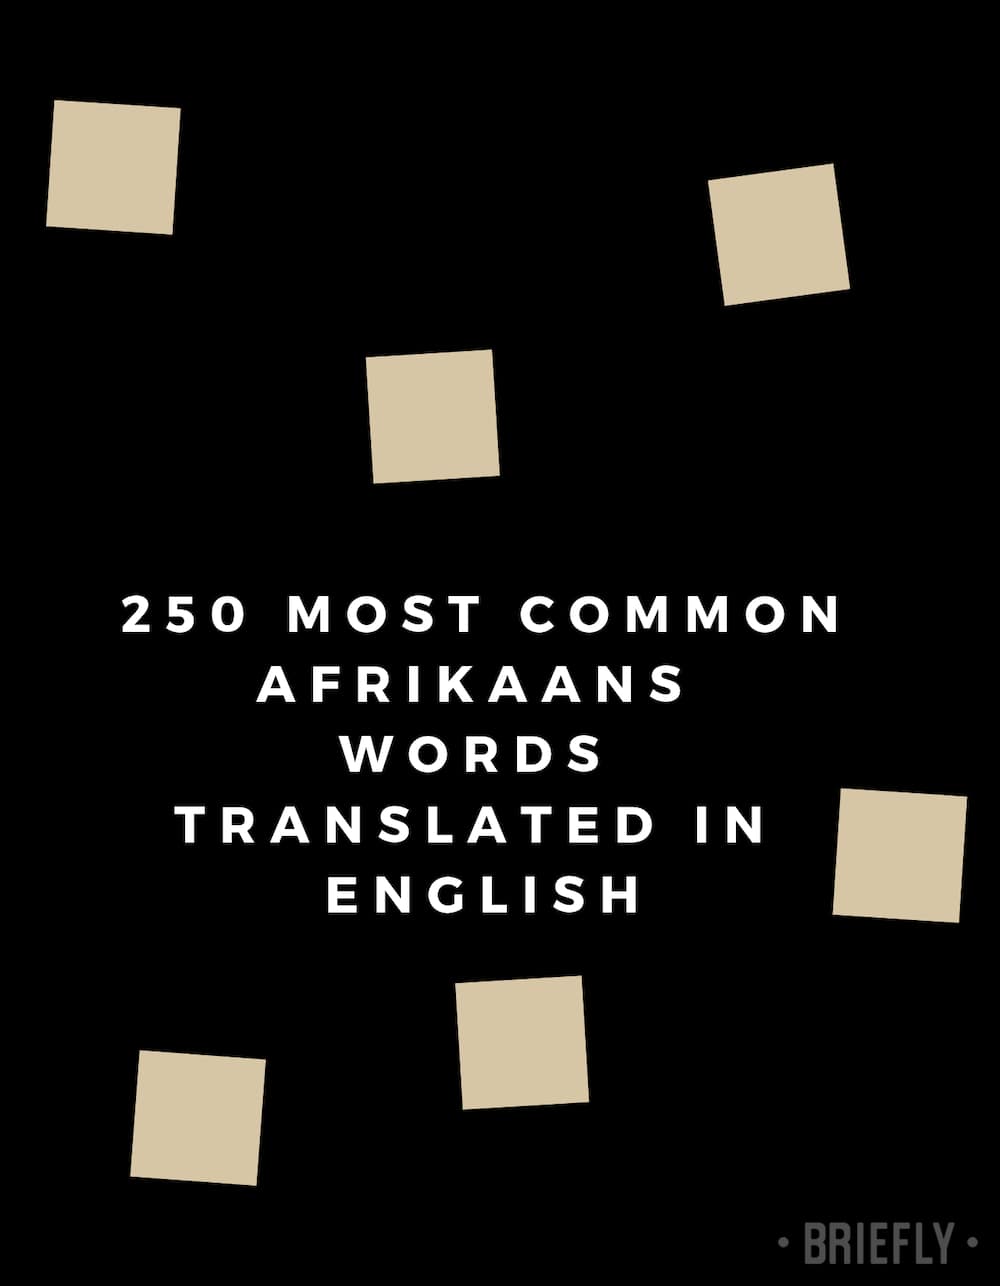 250 most common Afrikaans words translated in English